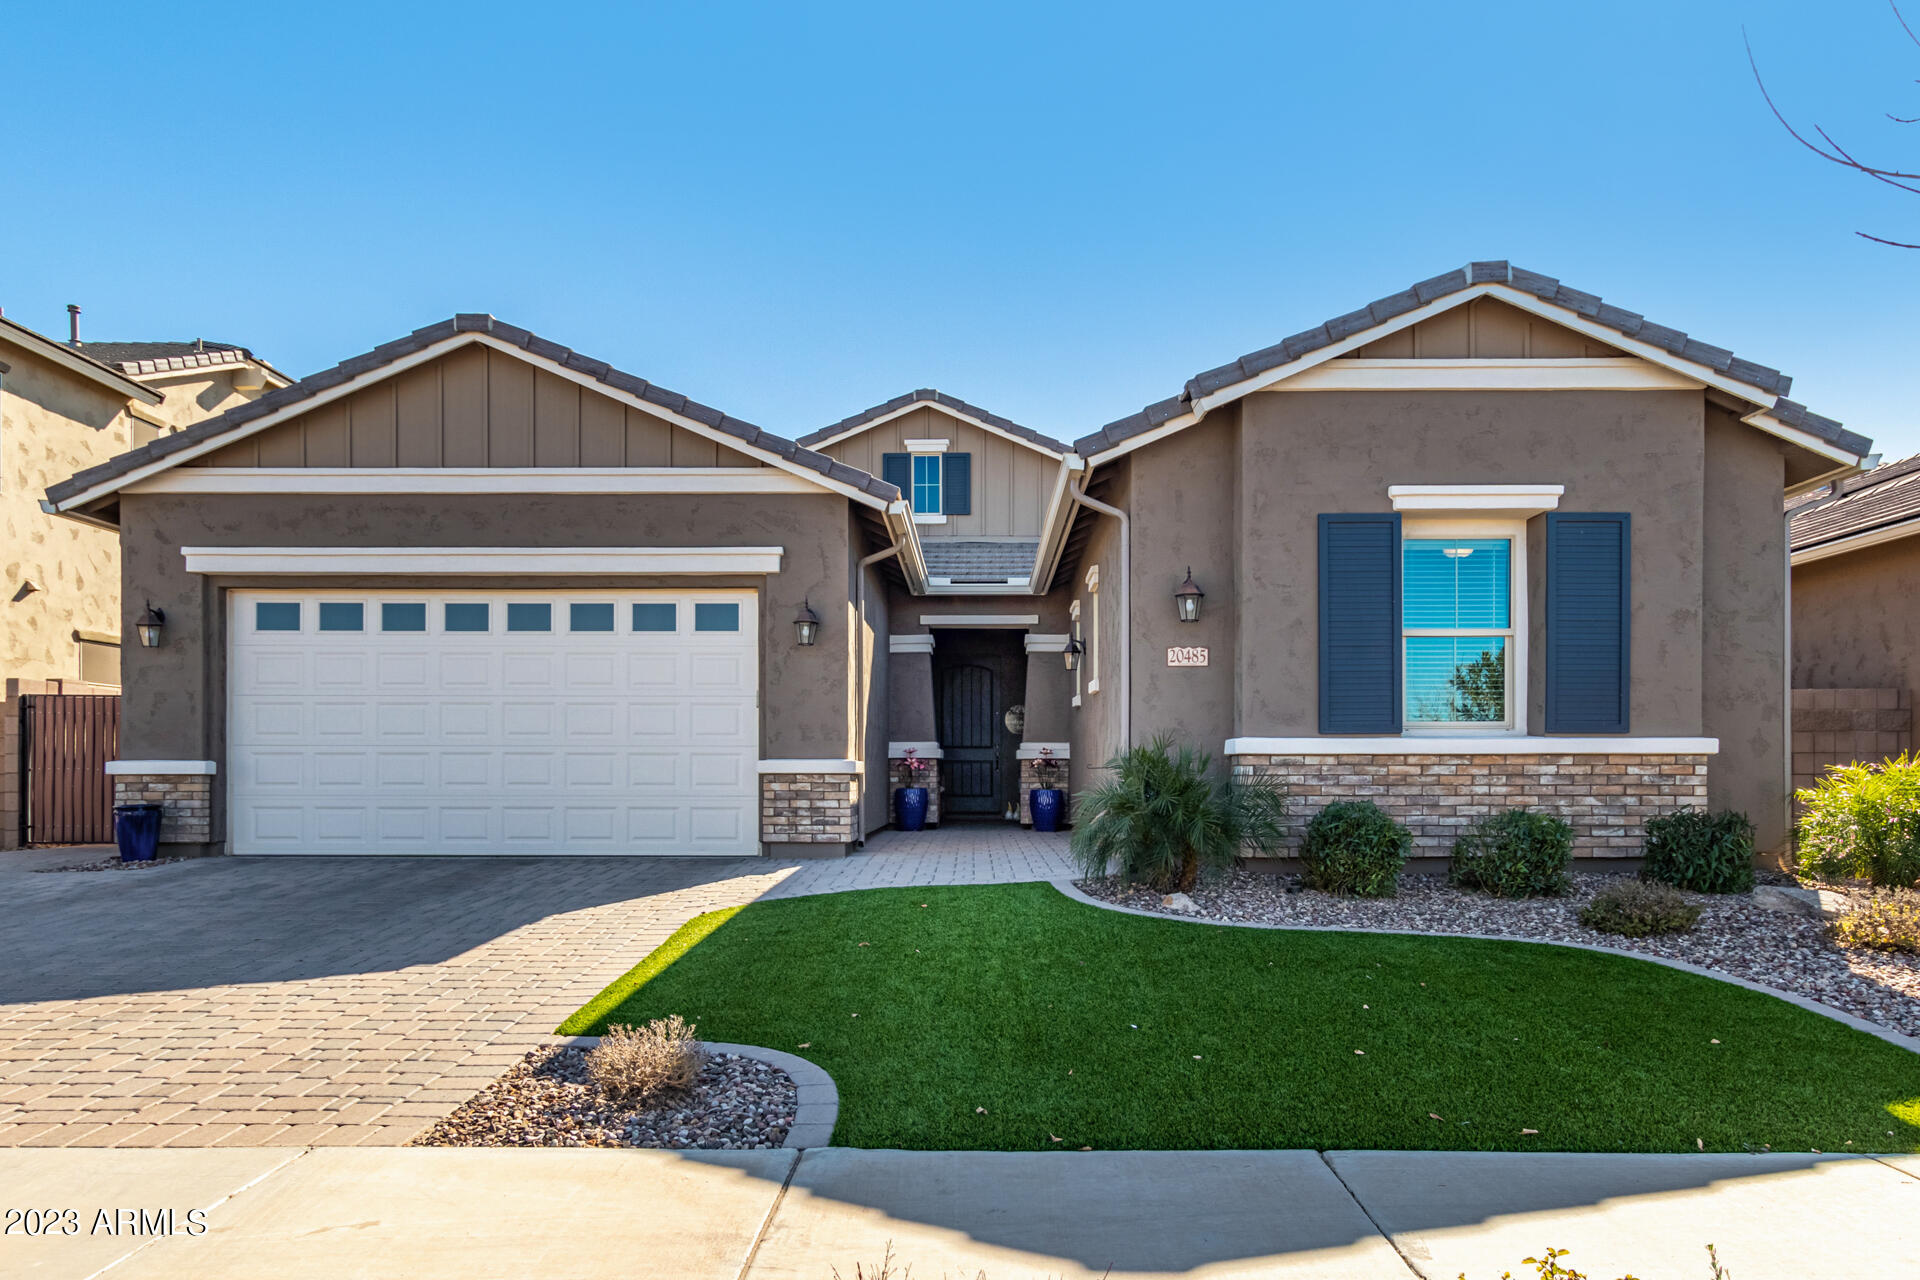 Queen Creek, AZ Real Estate Housing Market & Trends | Better Homes and Gardens<sup>®</sup> Real Estate